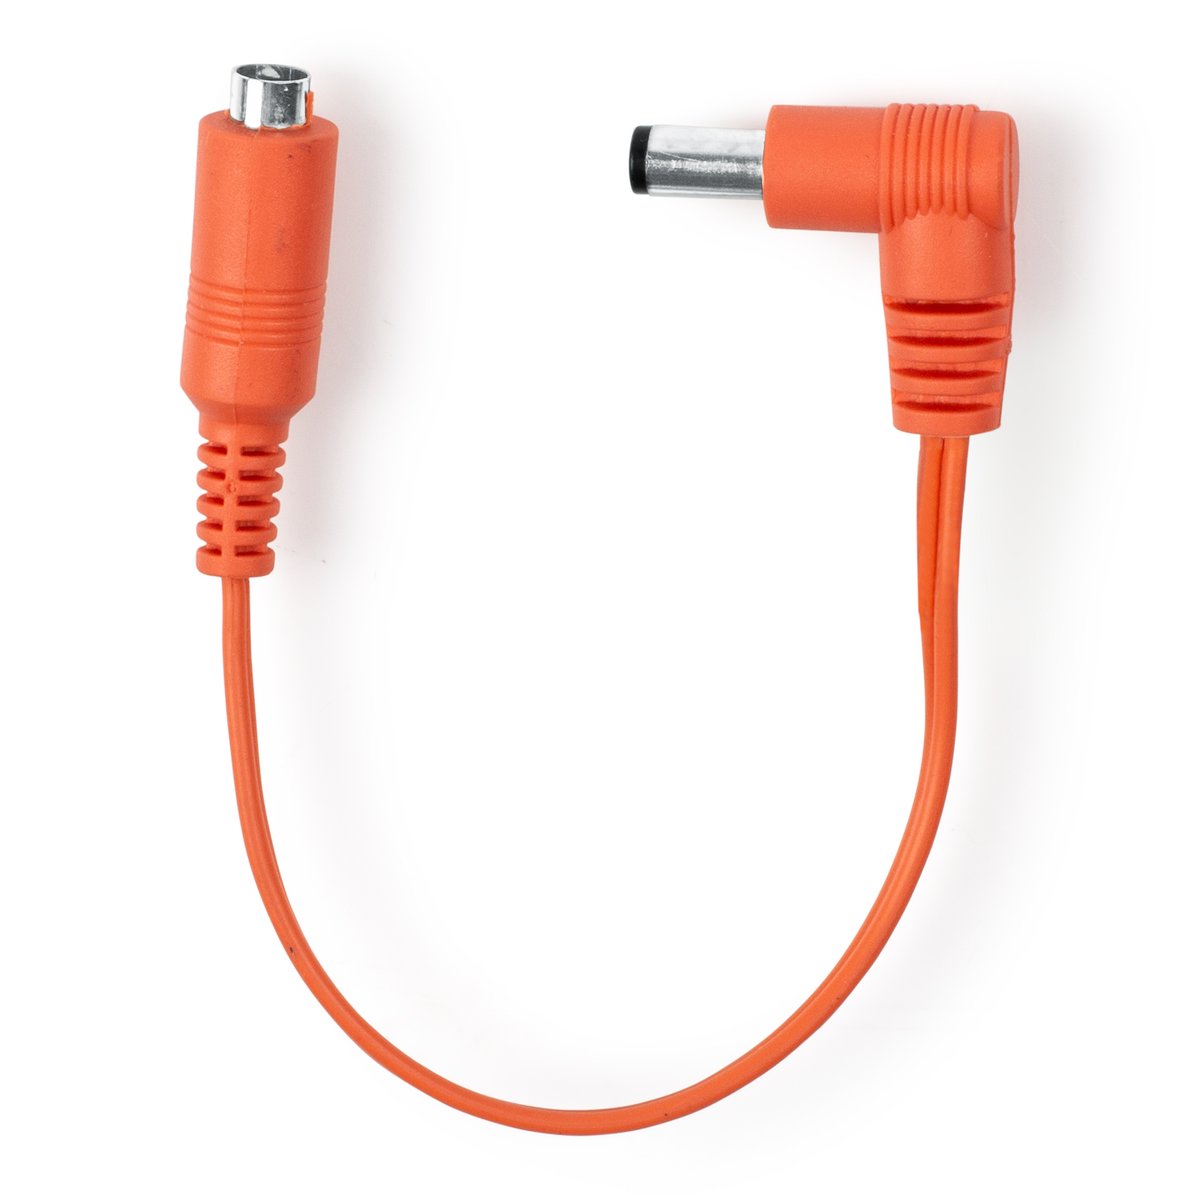 Polarity Inverter Cable for Effects Pedal Power Supplies